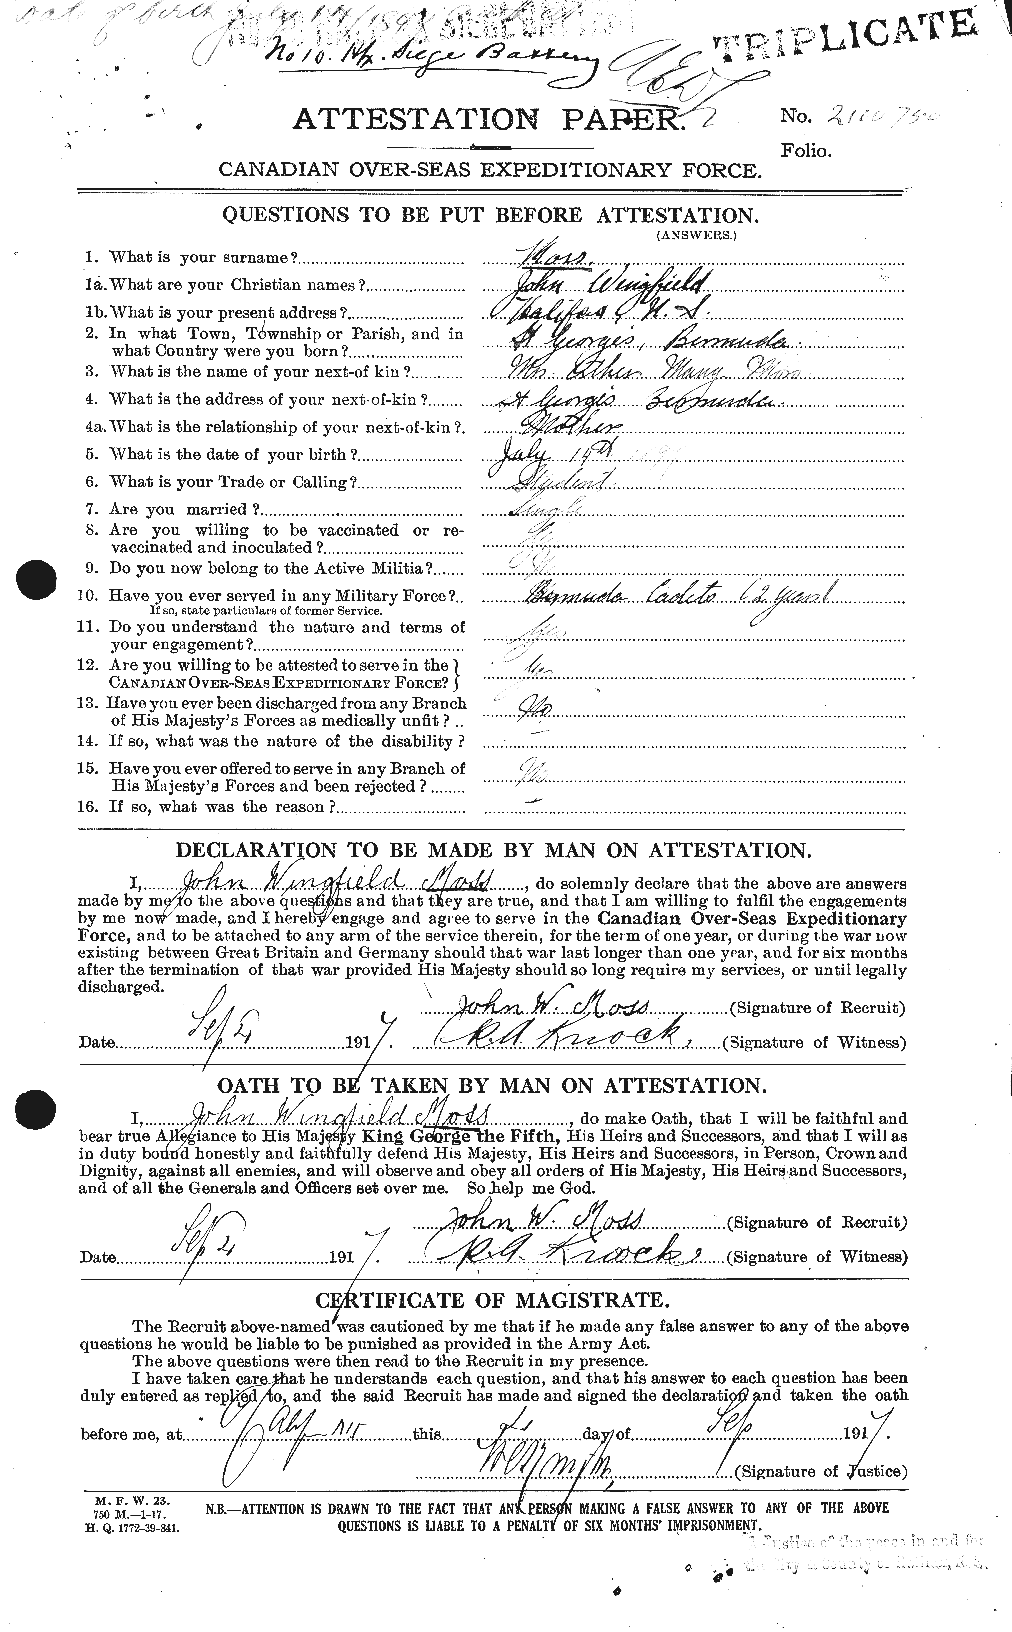 Personnel Records of the First World War - CEF 512033a